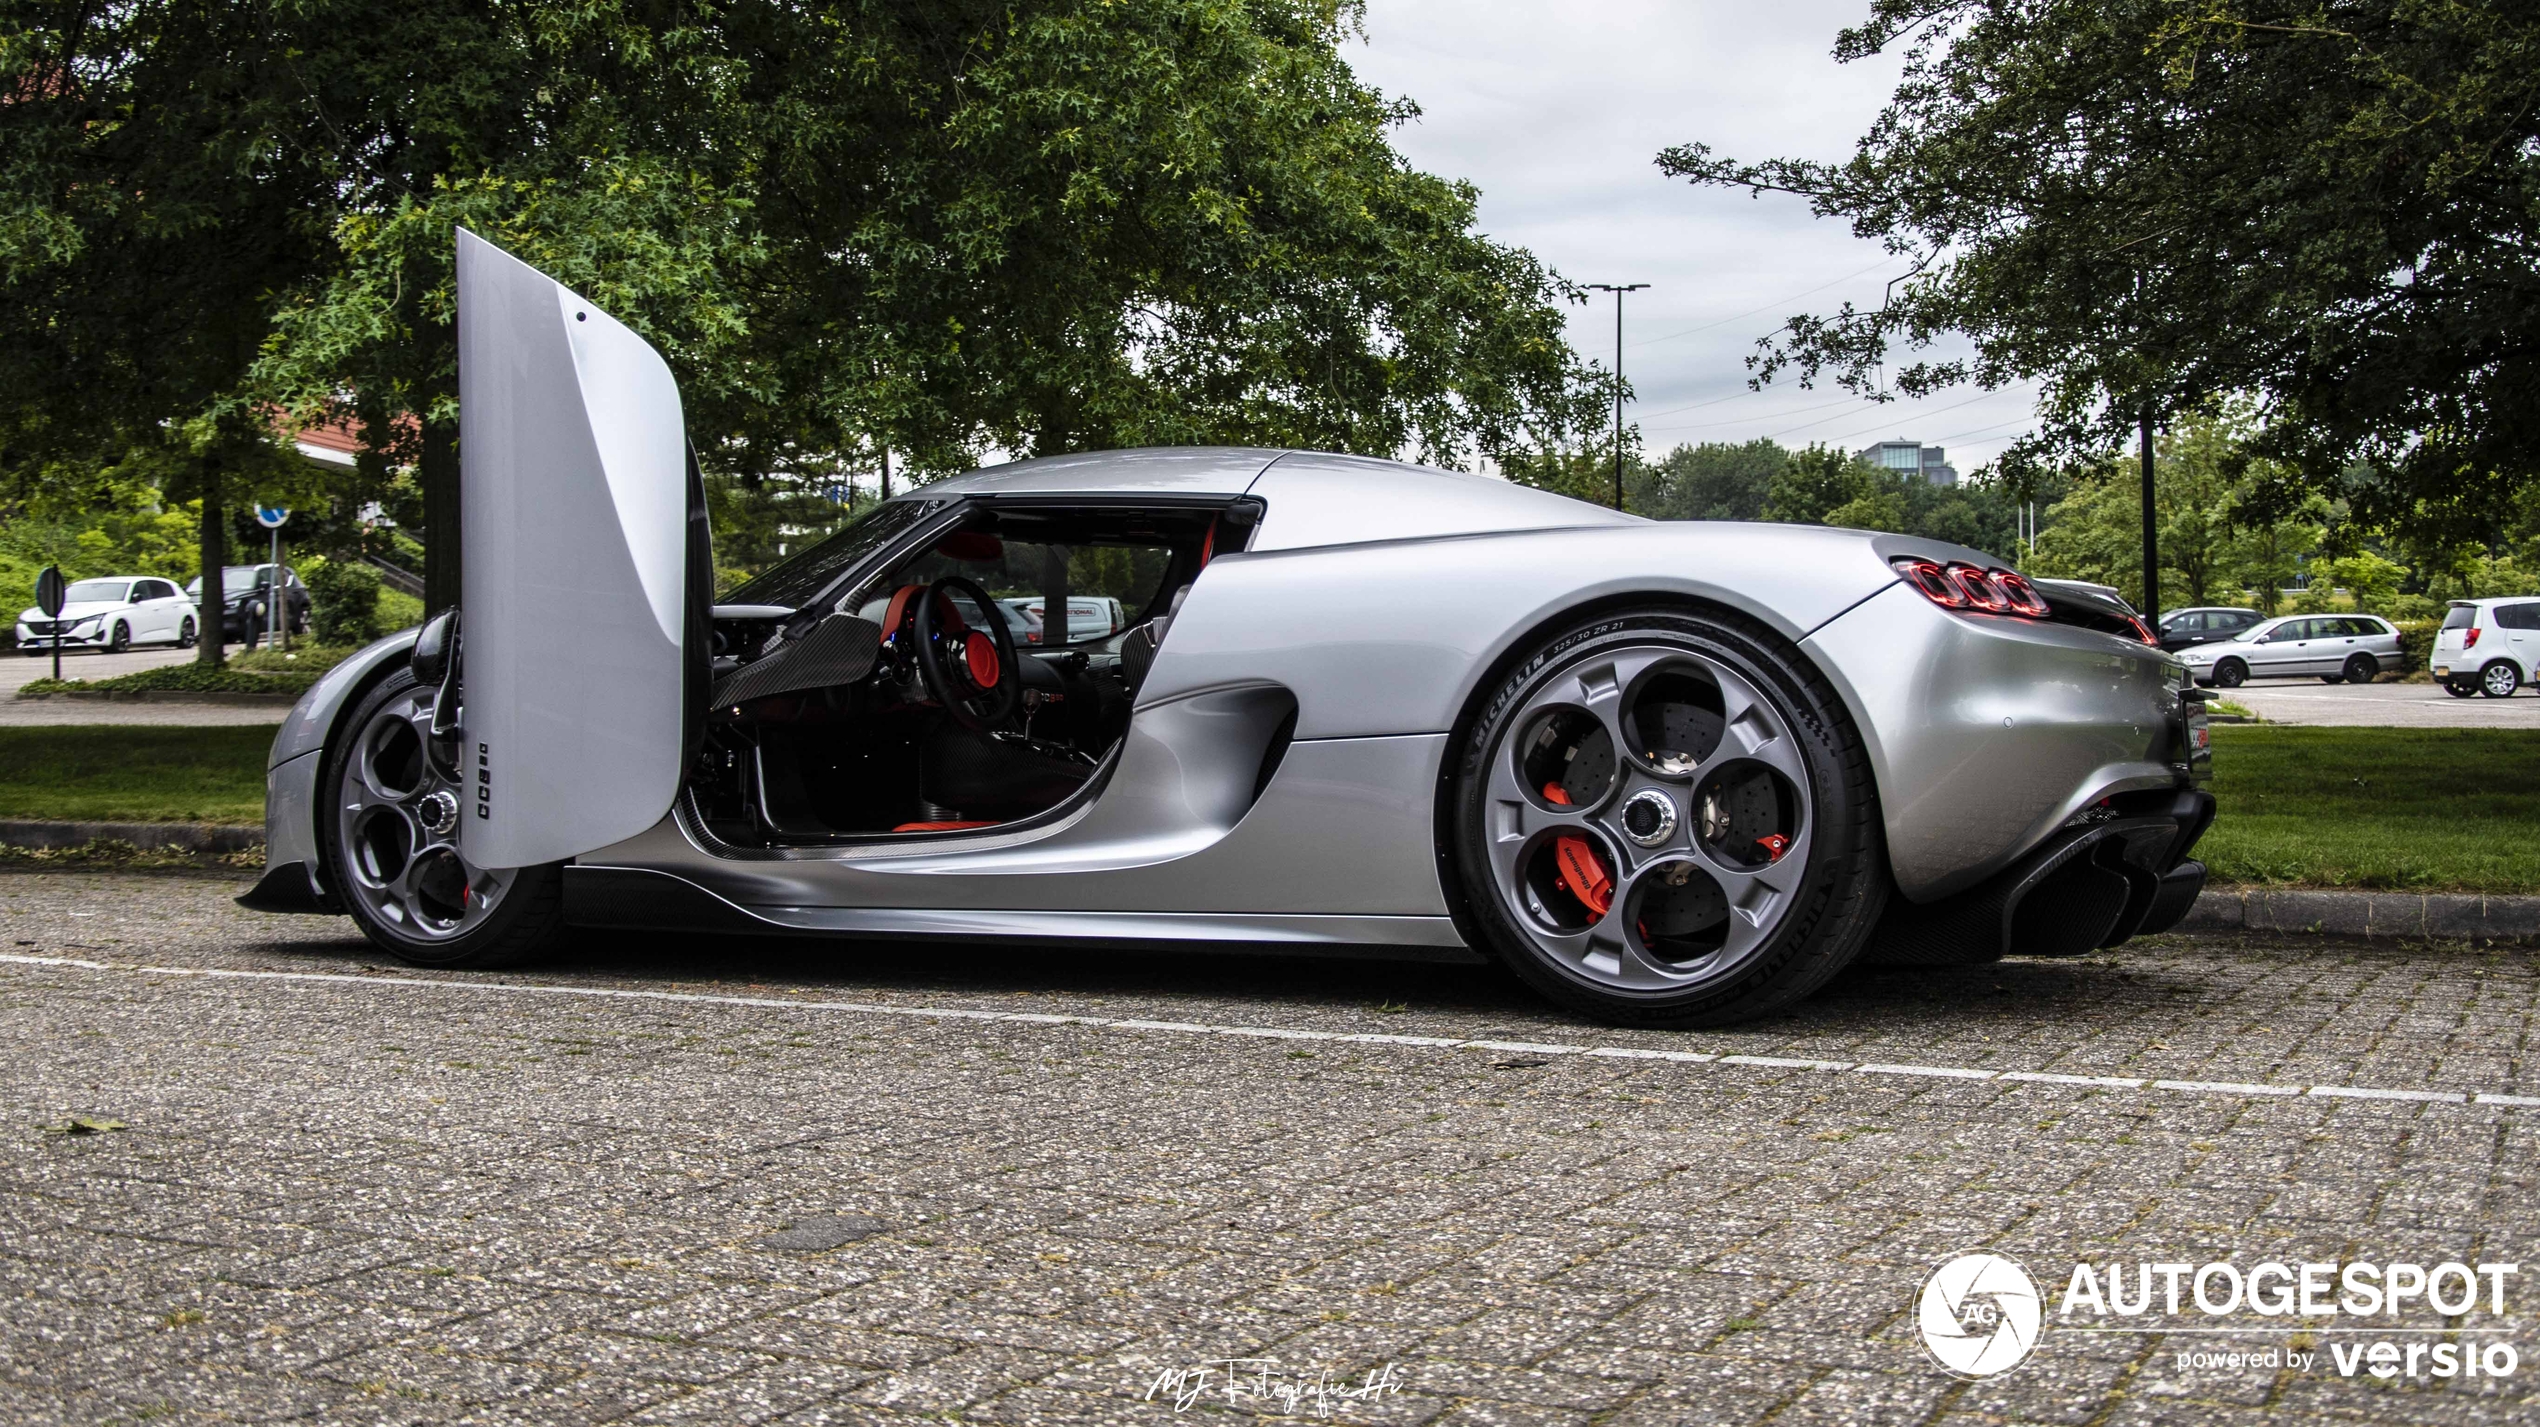 A Koenigsegg CC850 shows up in the netherlands